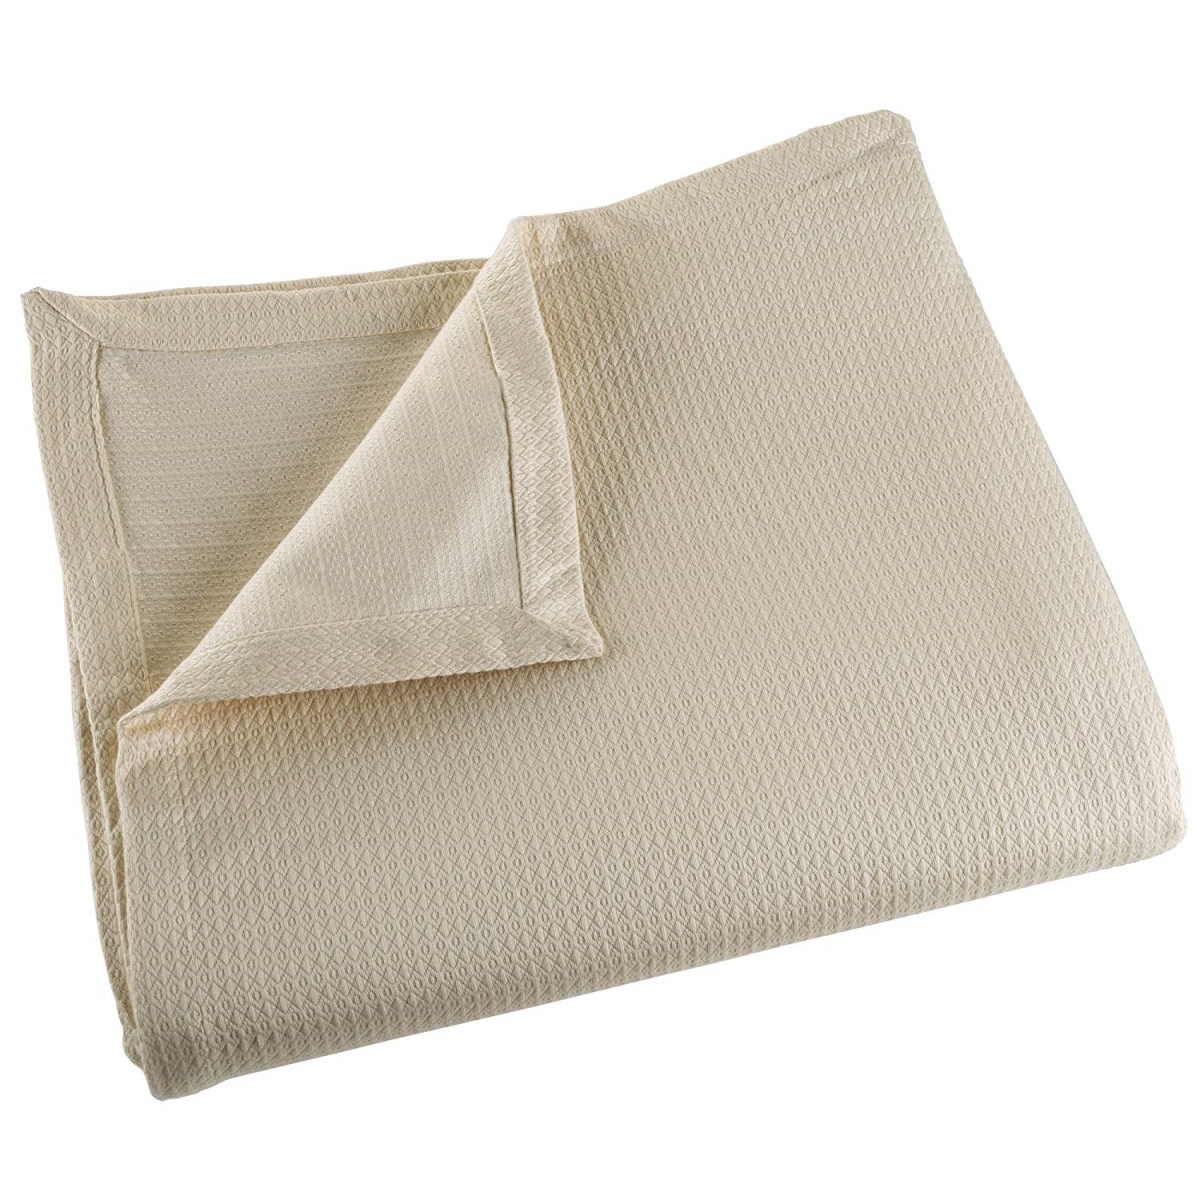 61a-43296 Soft Breathable 100 Percent Cotton Blanket, Taupe - Full & Queen Size